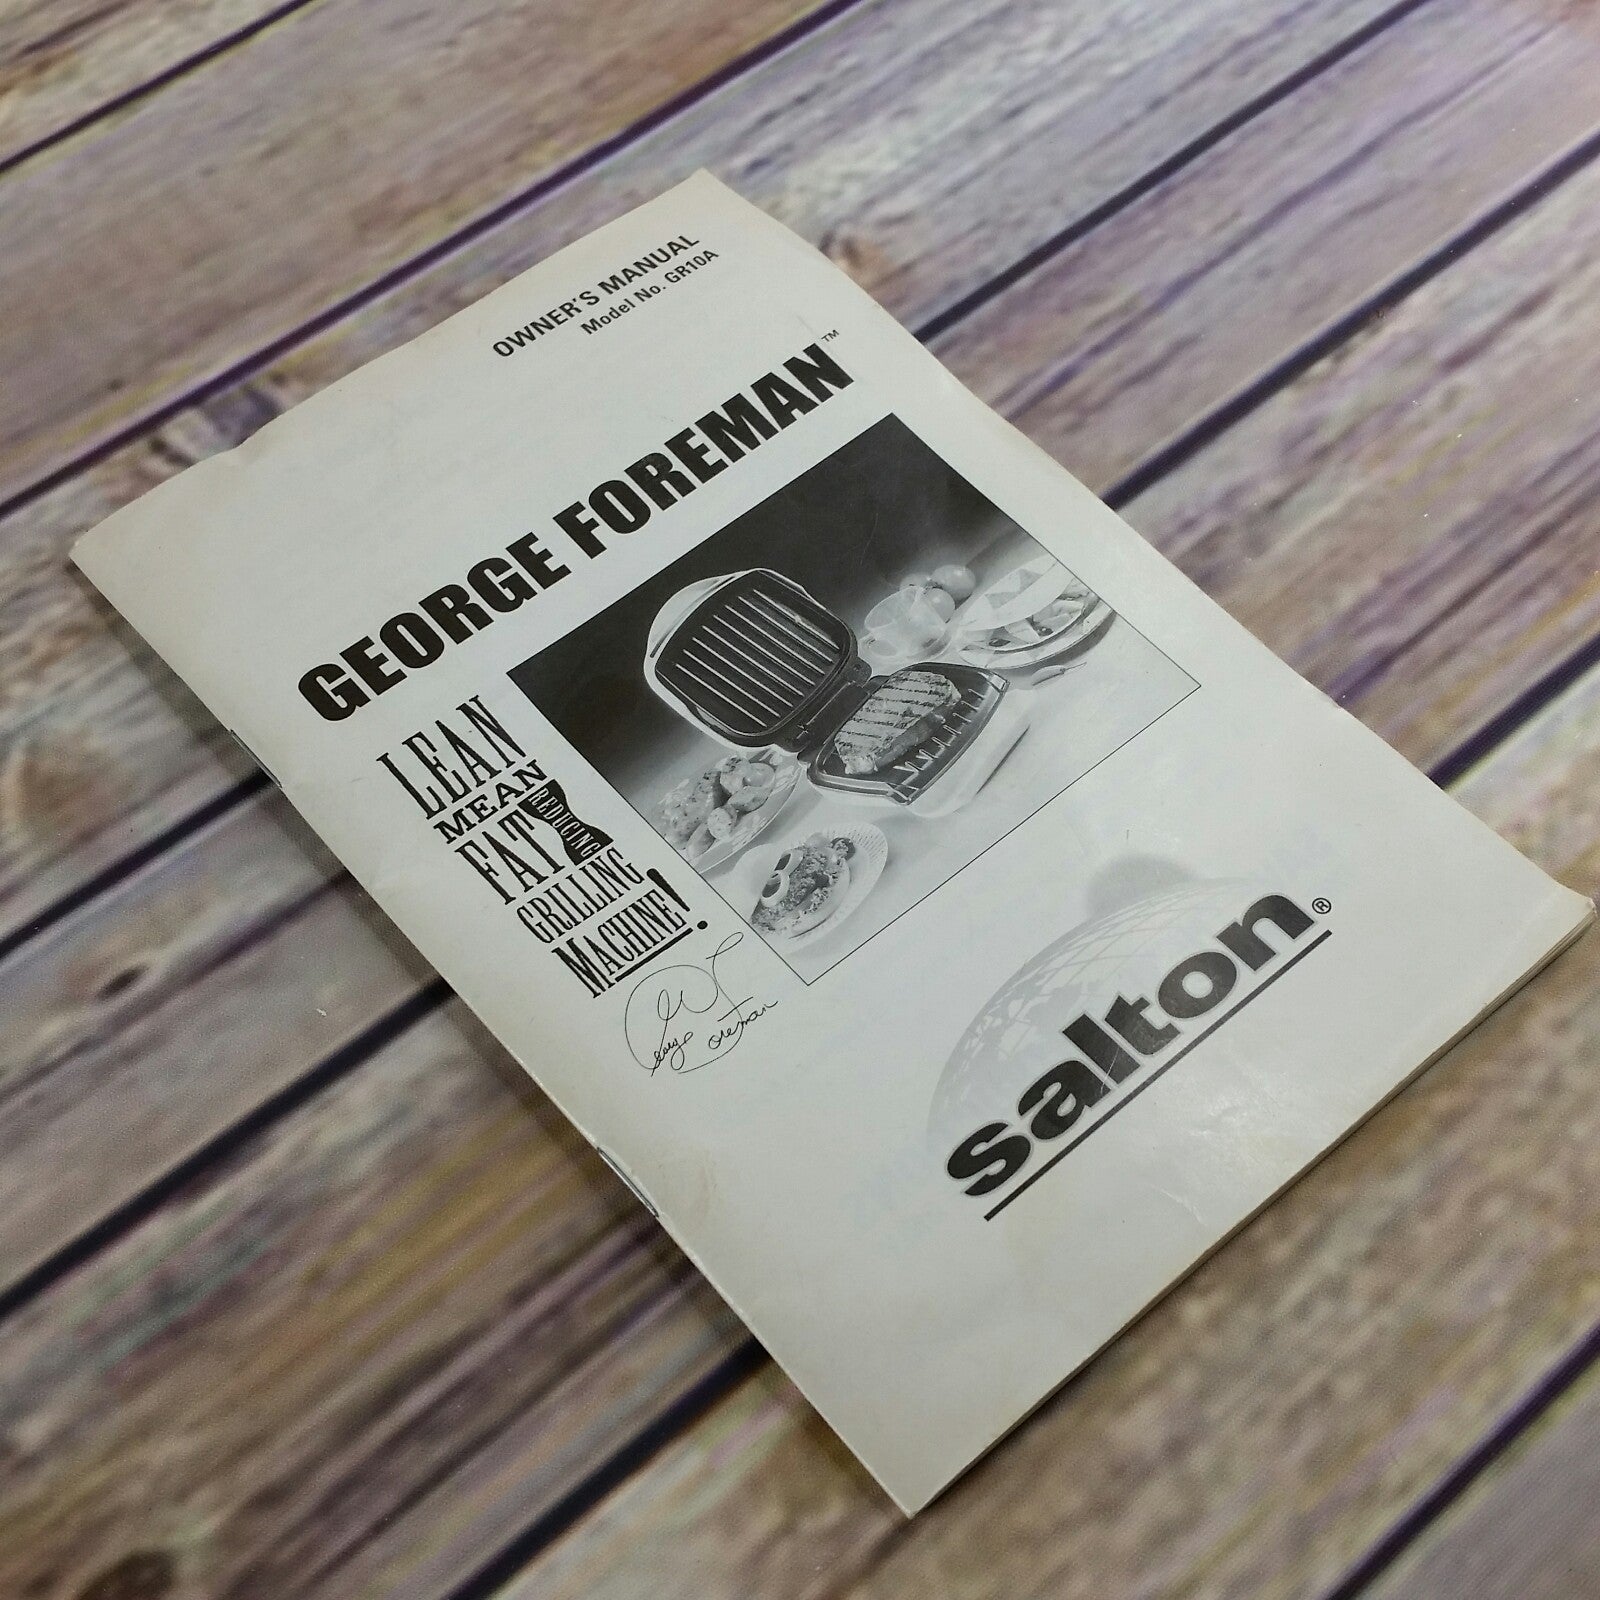 Vintage Cookbook George Foreman Instructions Recipes Manual Paperback Lean Mean Fat Reducing Grilling Machine Salton - At Grandma's Table